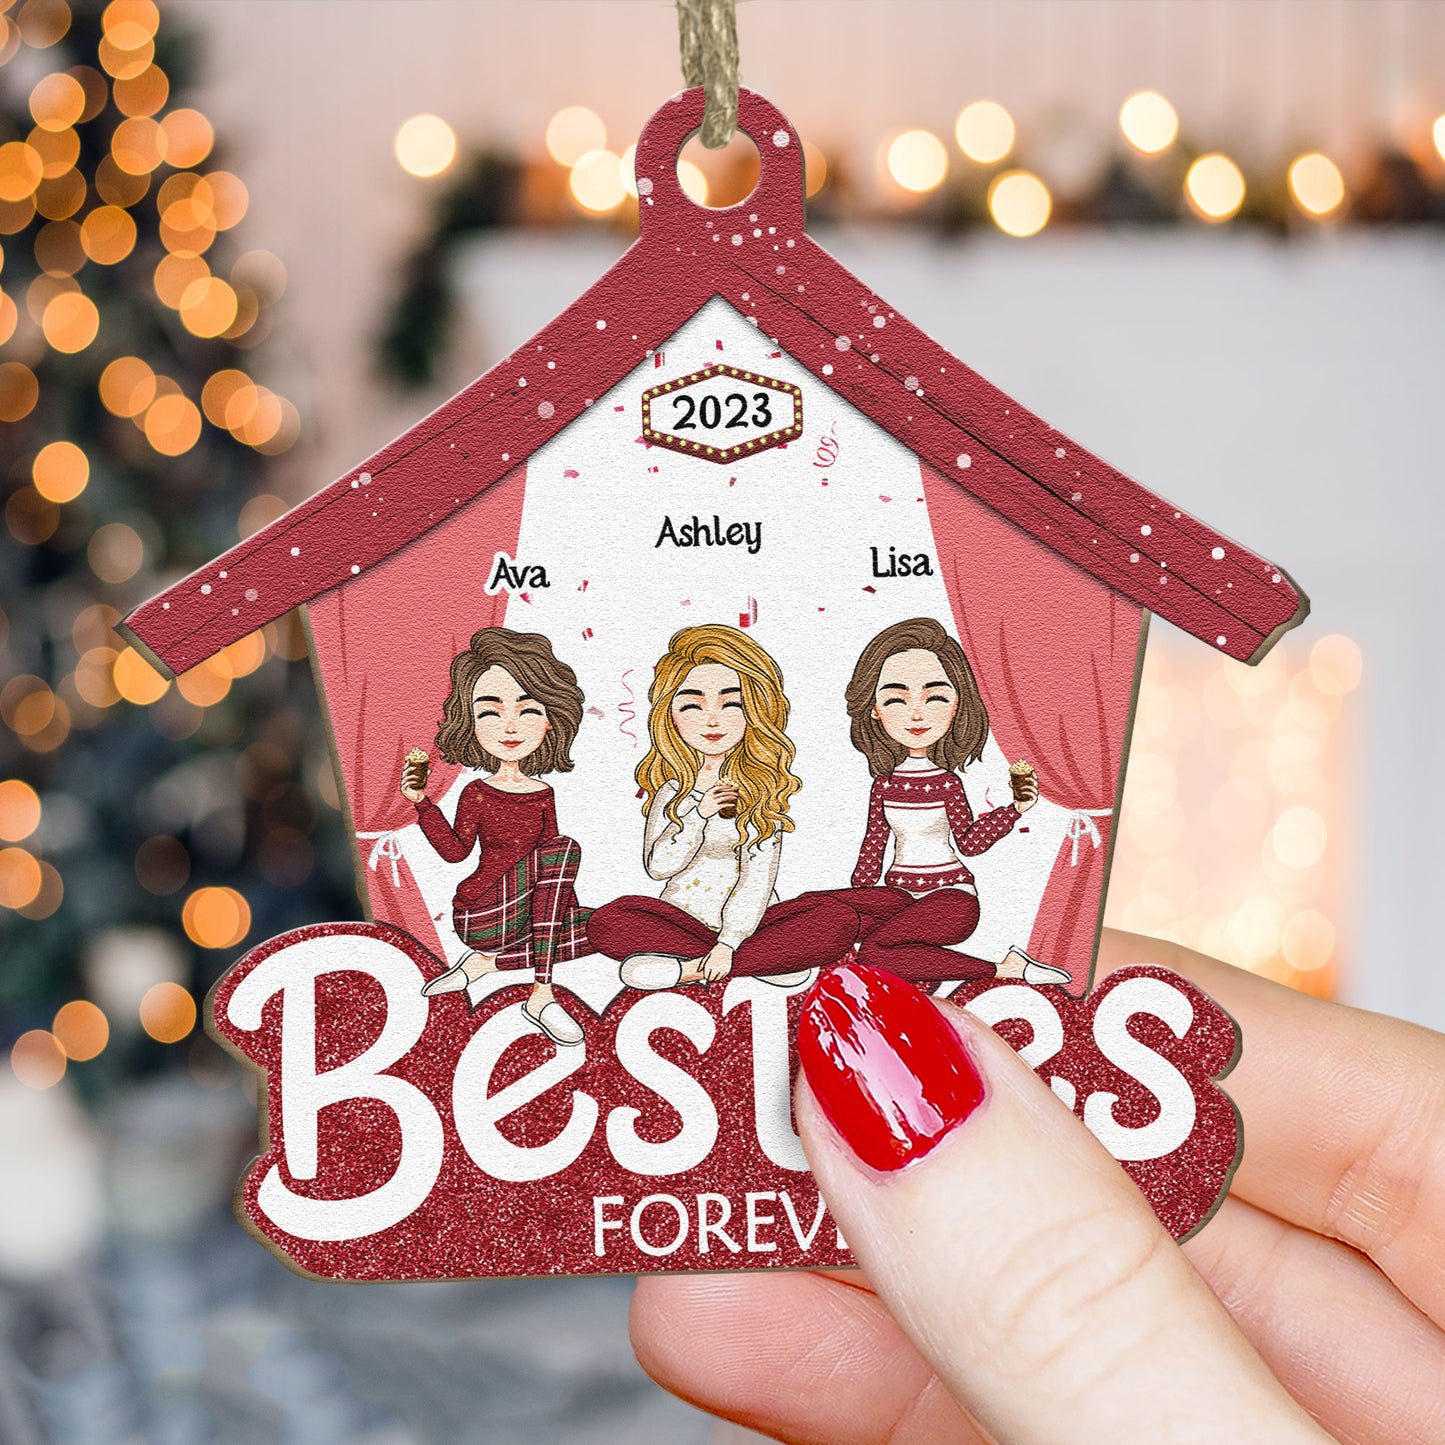 Besties Forever - Limited Version - Personalized Wooden Ornament